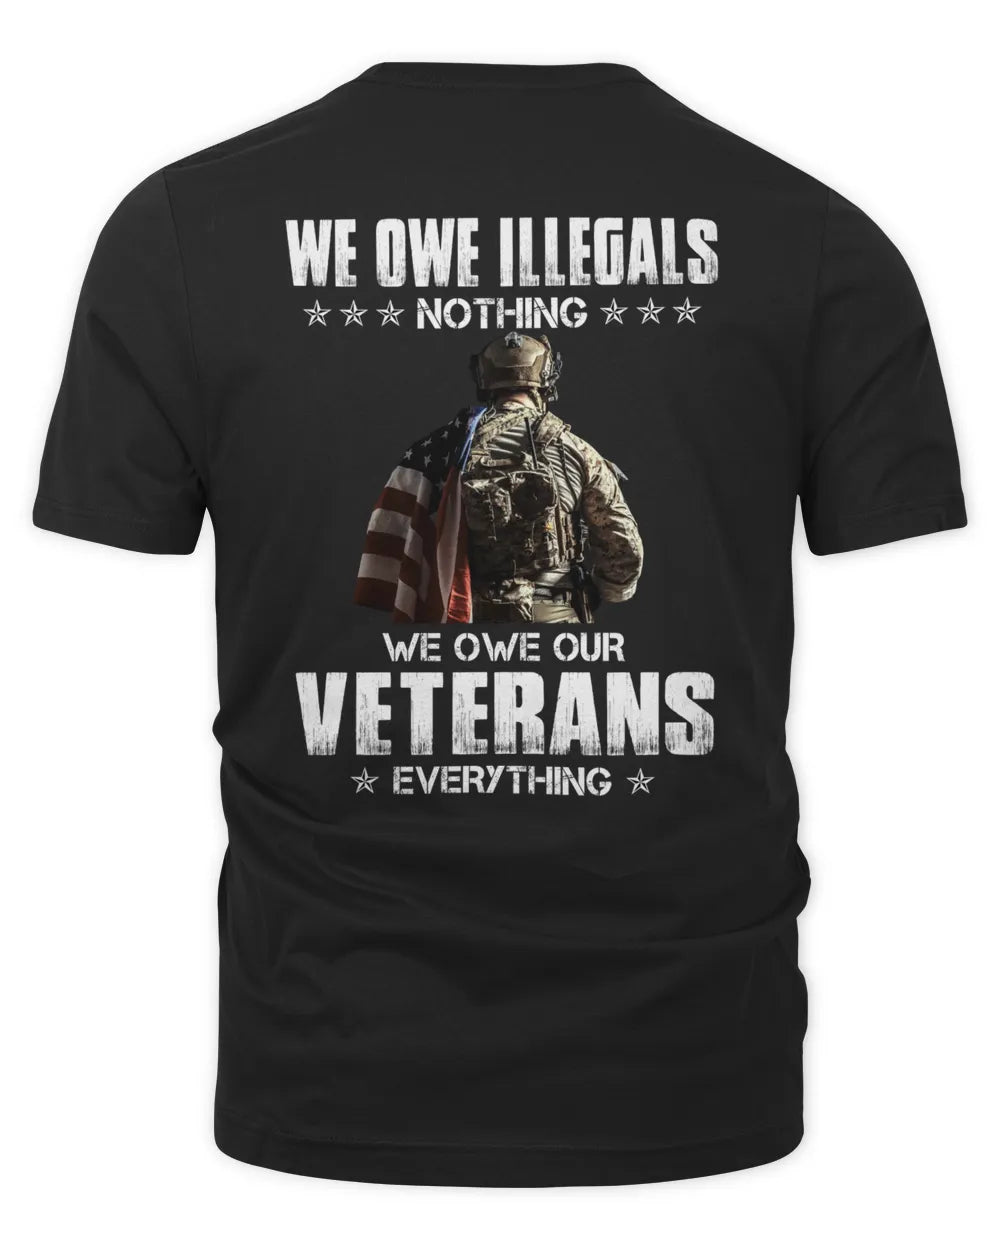 We Owe Illegals Nothing - Classic T-Shirt